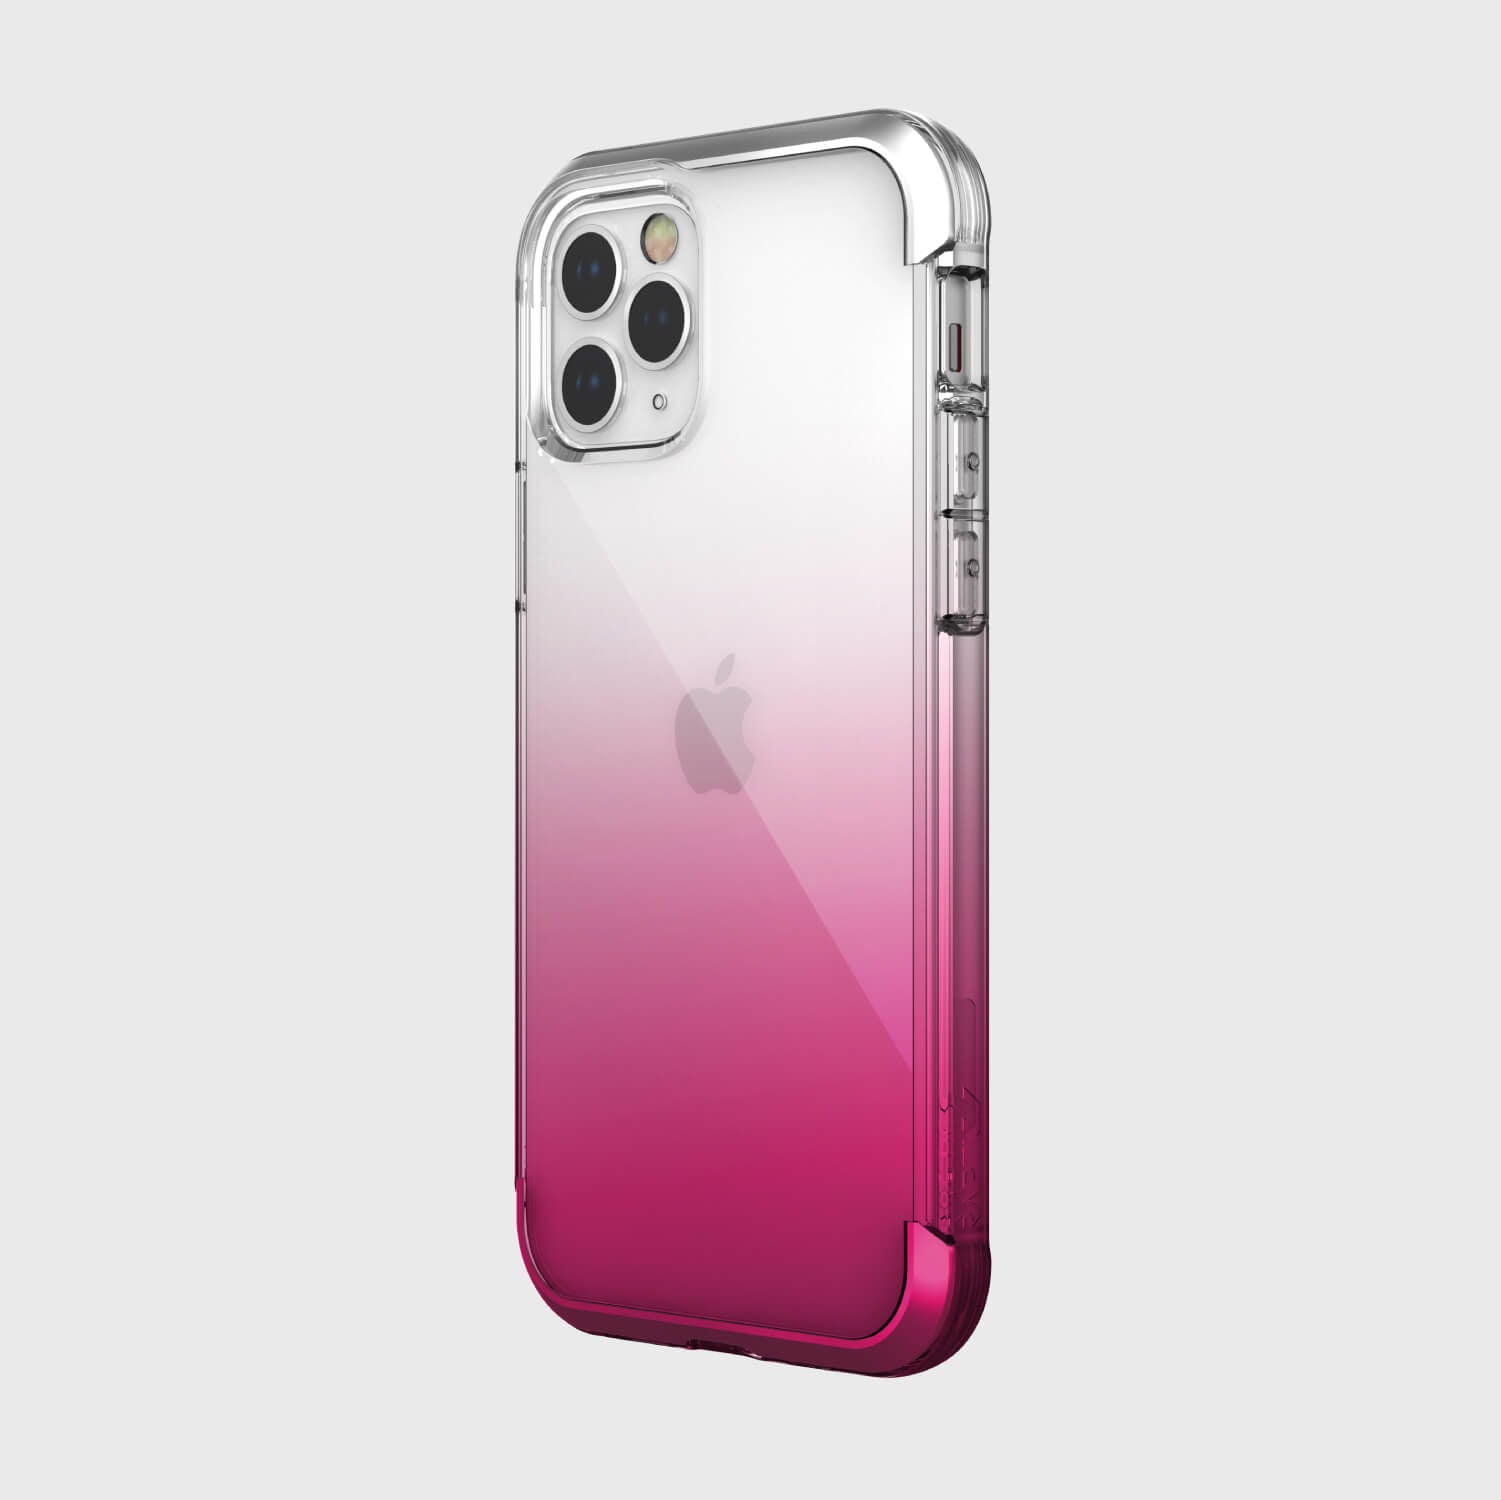 Showing a iPhone 12 Pro in a pink gradient Raptic Air case